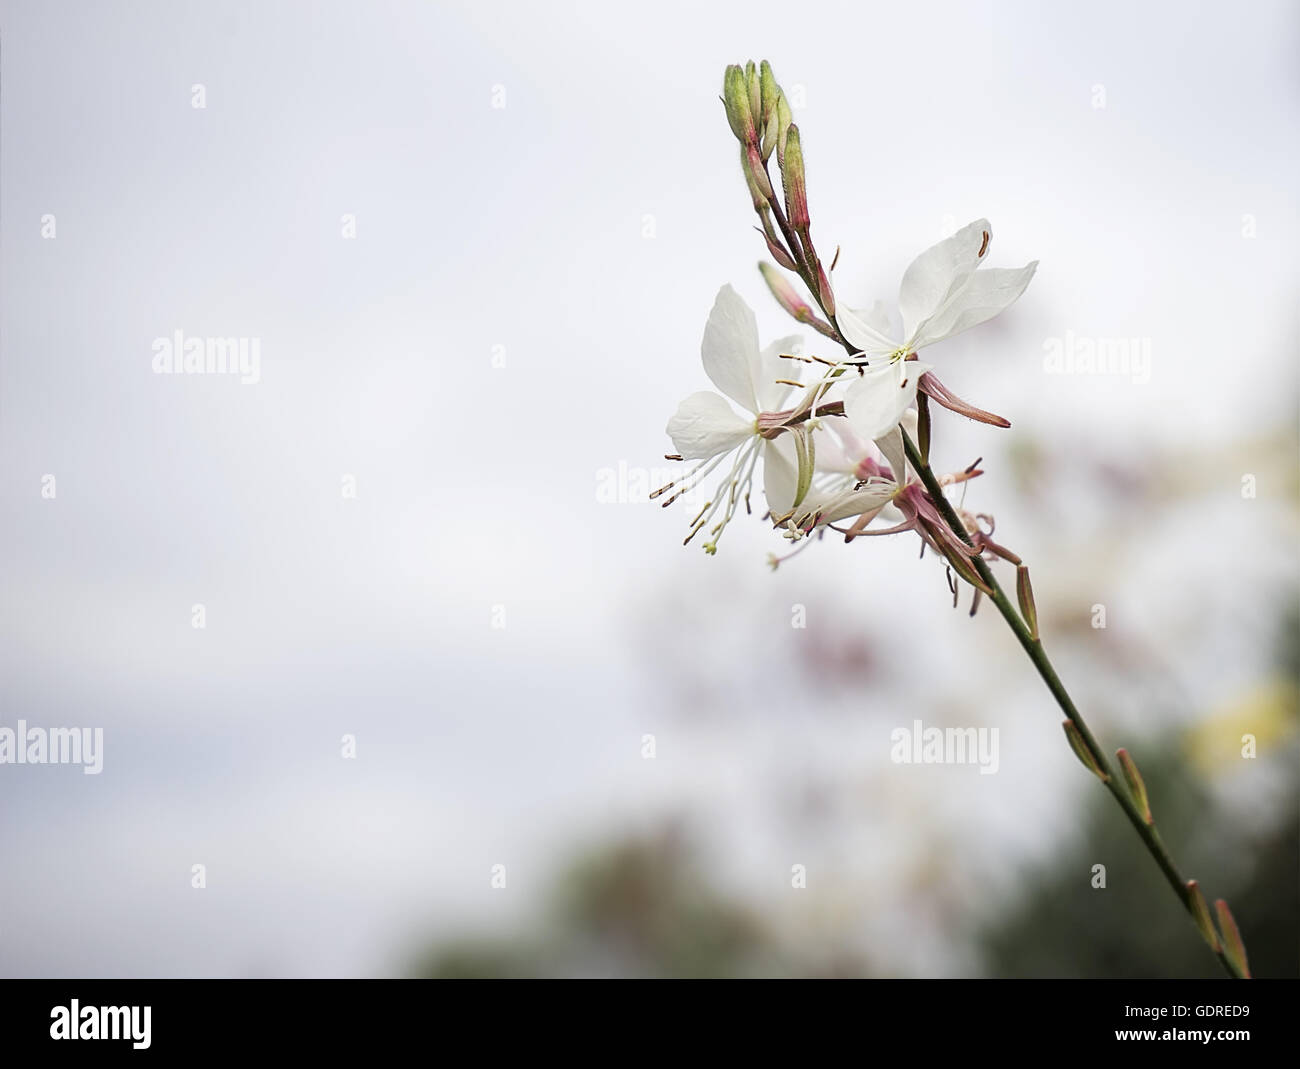 Gaura flower or butterfly bush with neutral copy-space background suitable for mourning condolence and sympathy greeting card Stock Photo